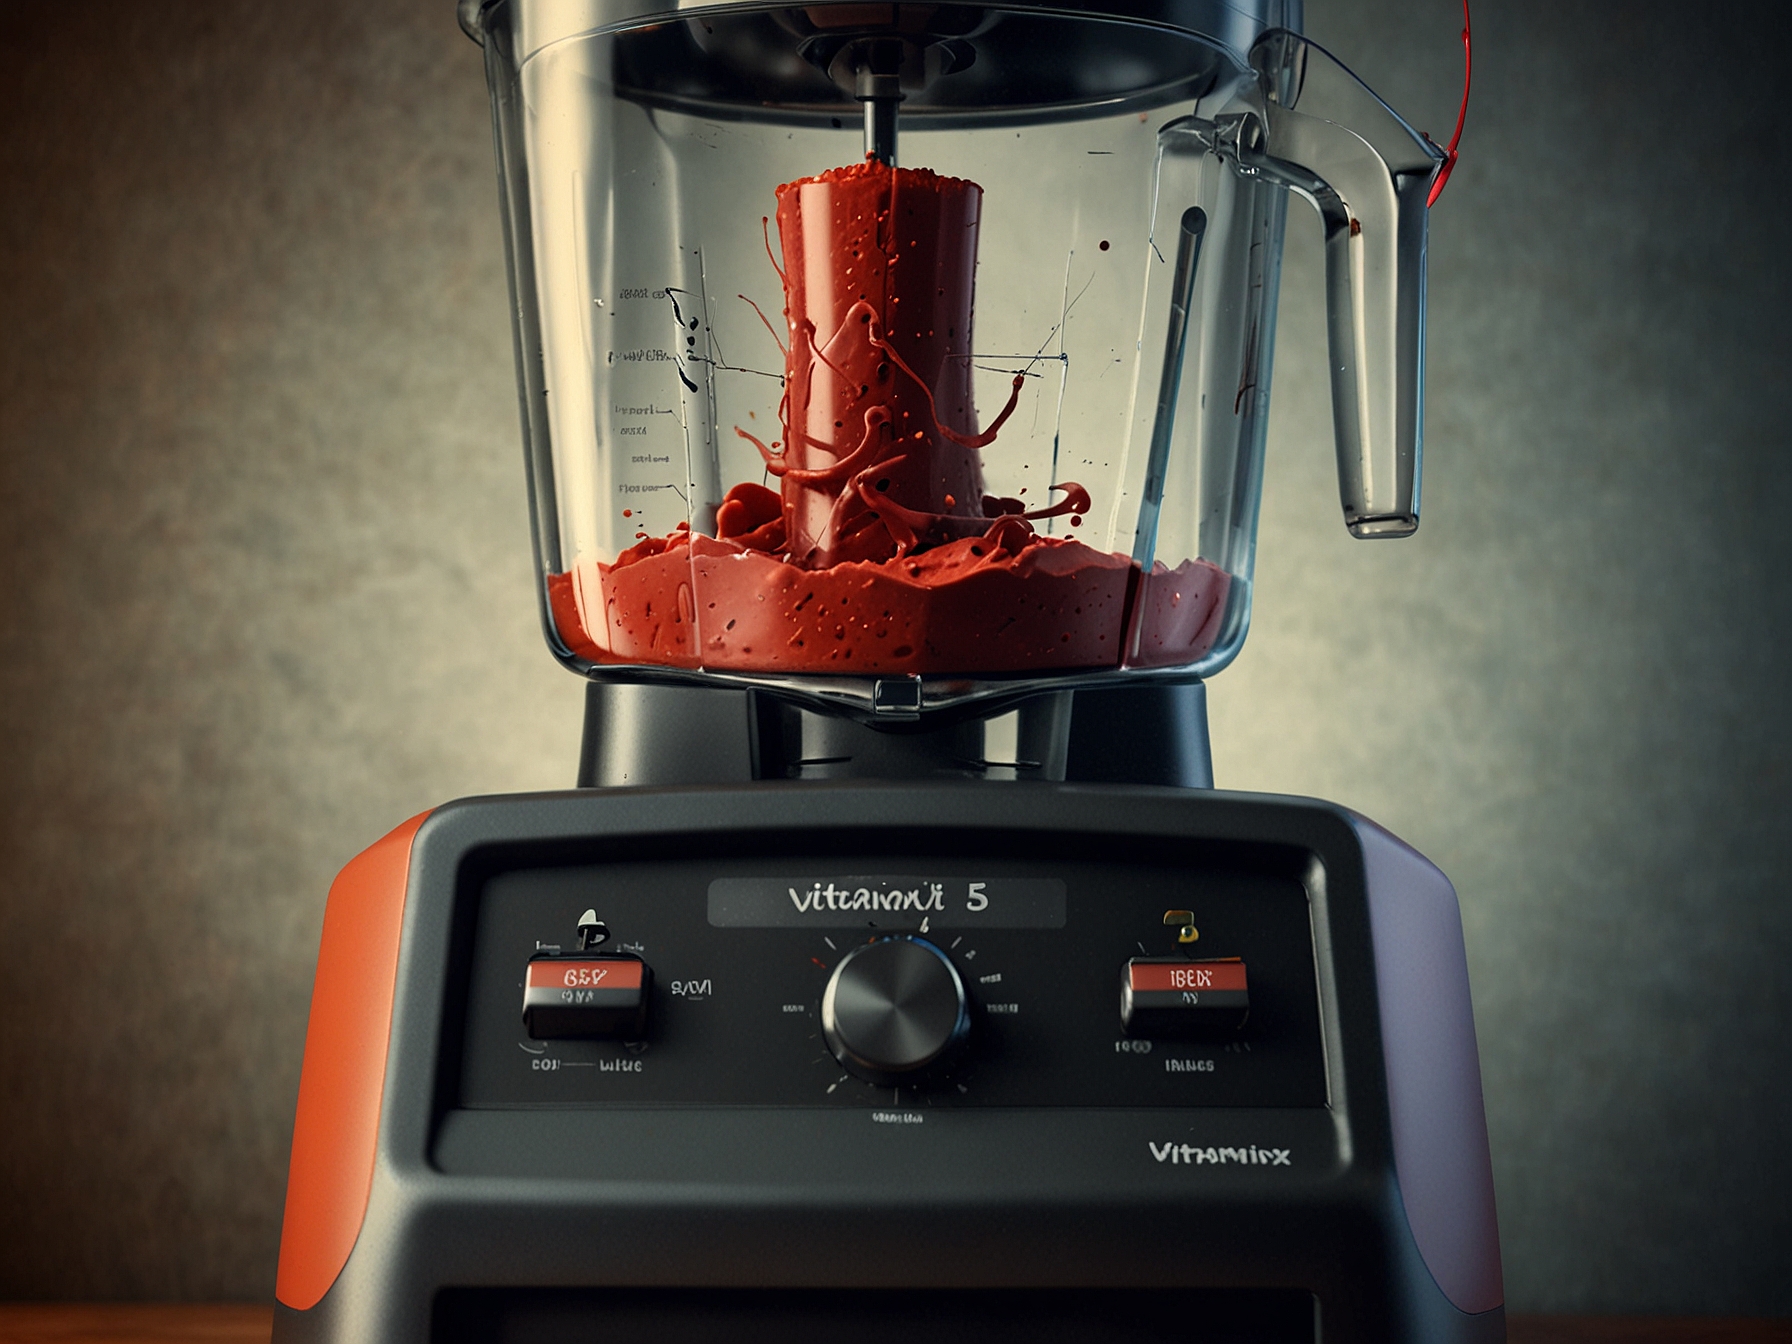 A close-up image of a Vitamix blender, highlighting the blades. Warning signs are placed around the blades to emphasize the cutting hazard that led to the recall.